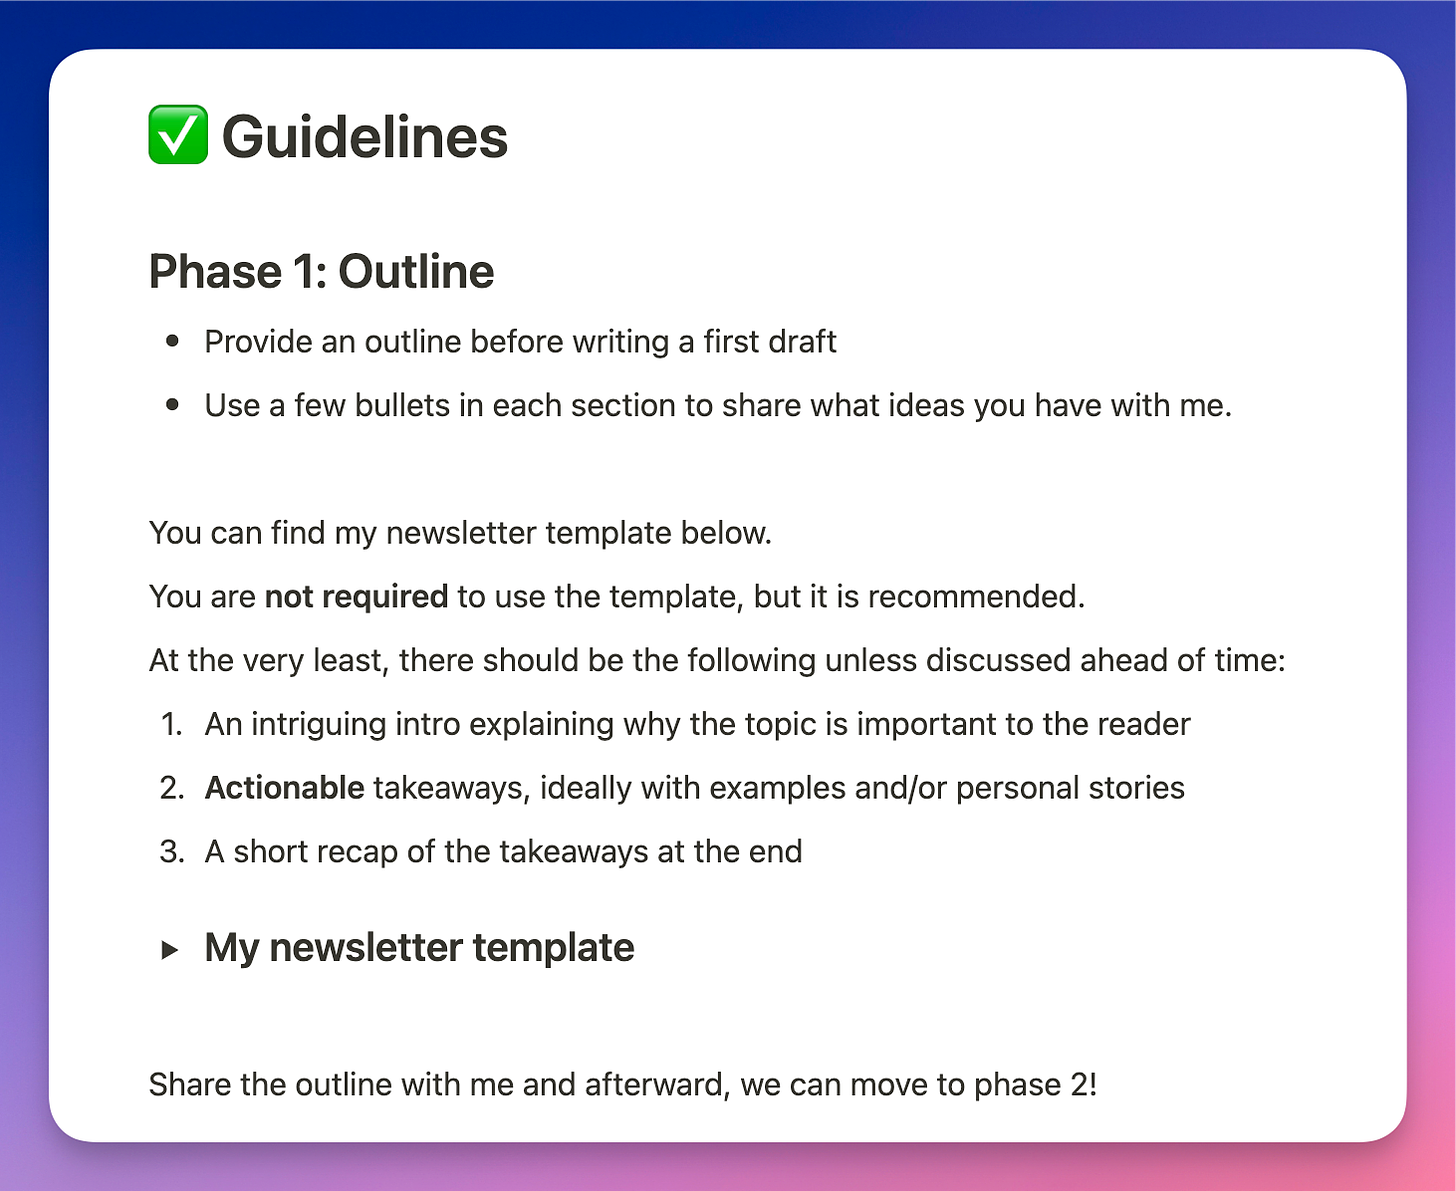 Phase 1 outline guidelines